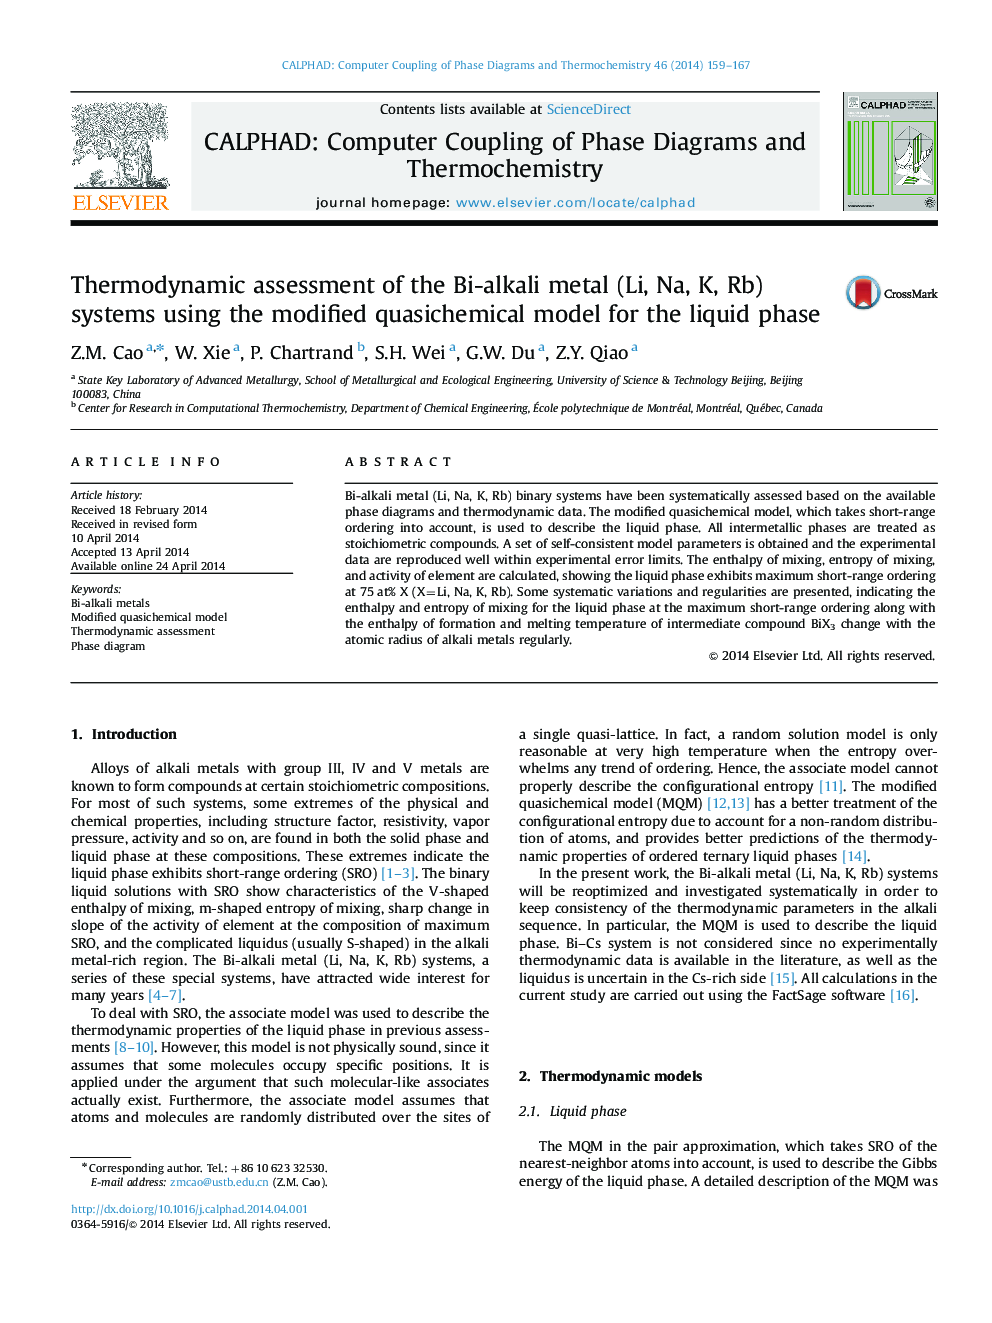 Thermodynamic assessment of the Bi-alkali metal (Li, Na, K, Rb) systems using the modified quasichemical model for the liquid phase